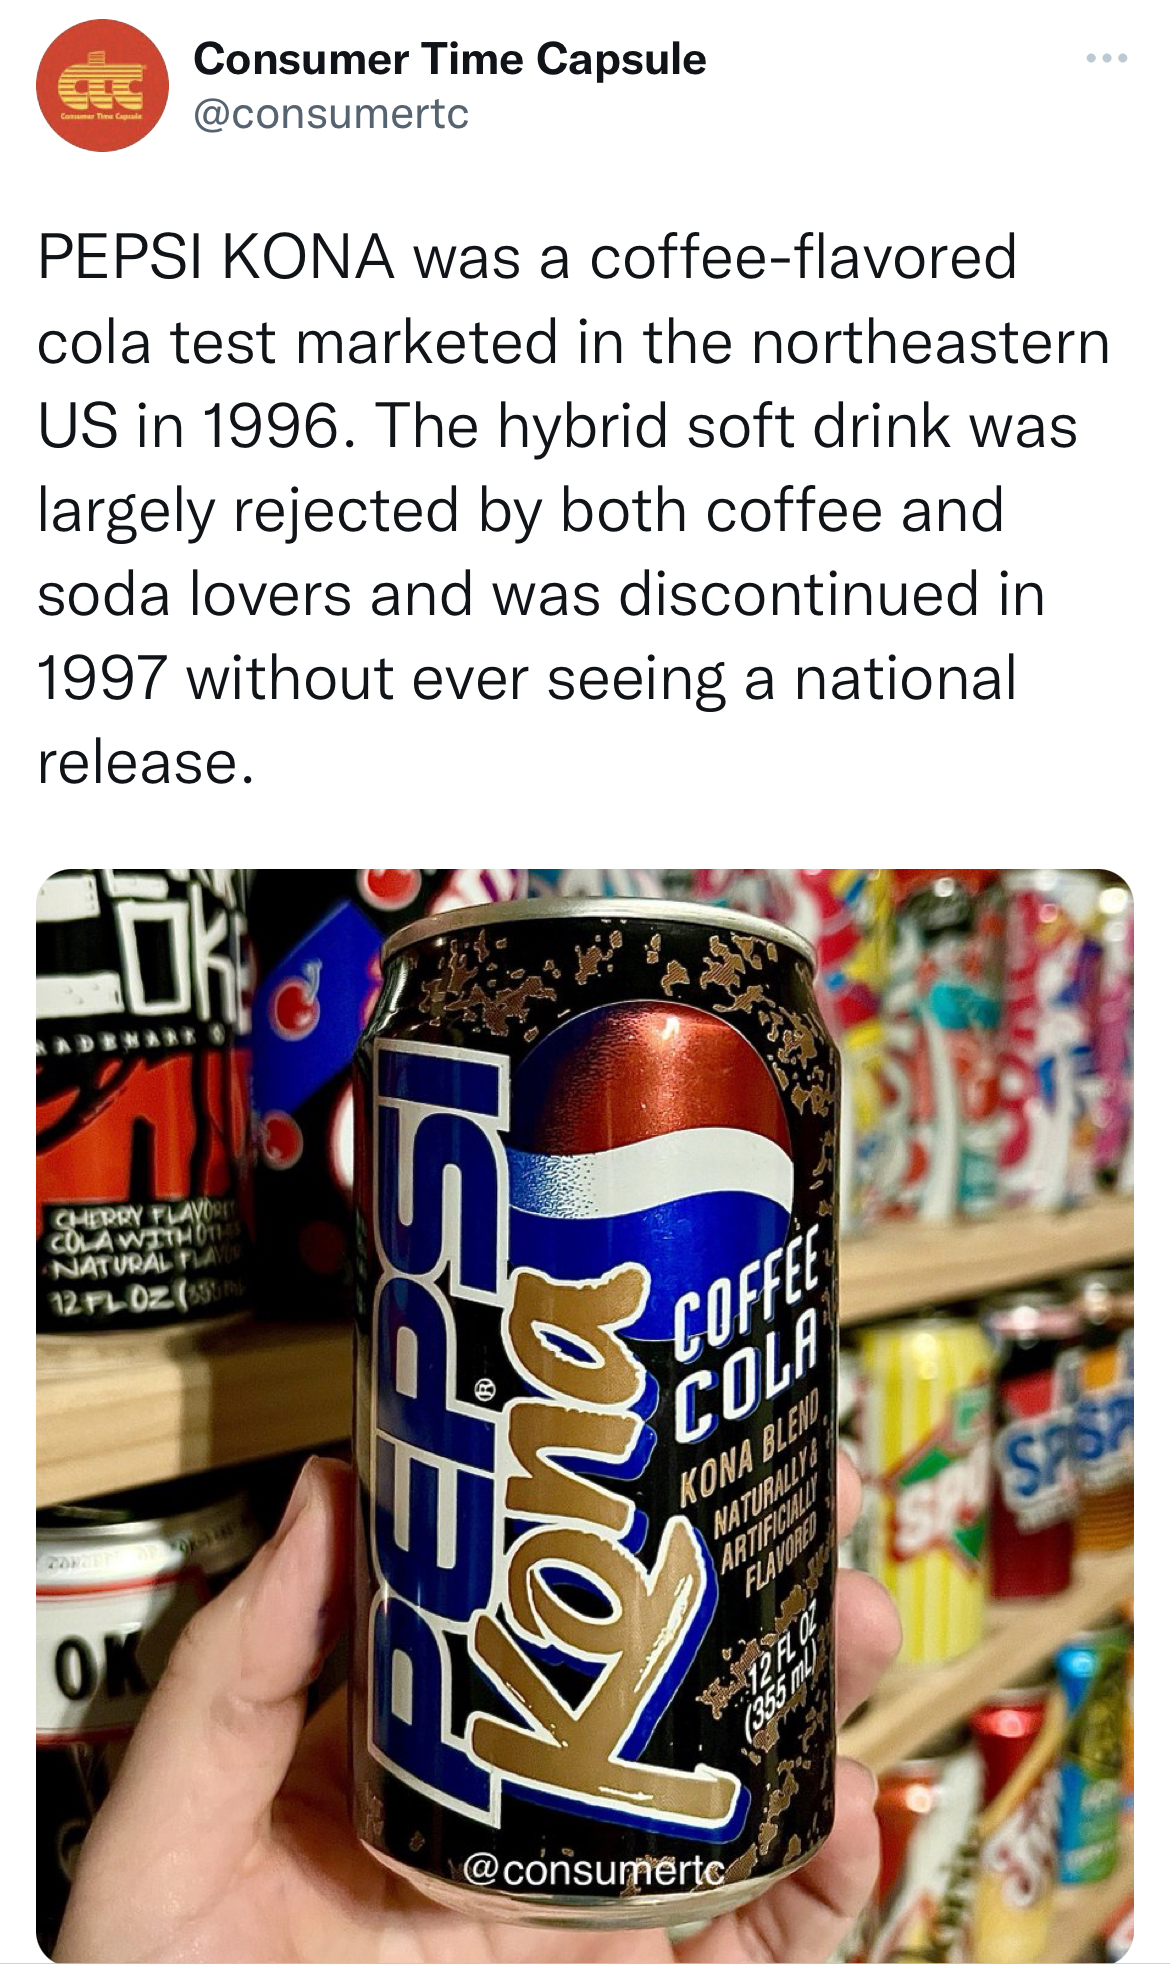 deranged tweets - pepsi kona - Pepsi Kona was a coffeeflavored cola test marketed in the northeastern Us in 1996. The hybrid soft drink was largely rejected by both coffee and soda lovers and was discontinued in 1997 without ever seeing a national release